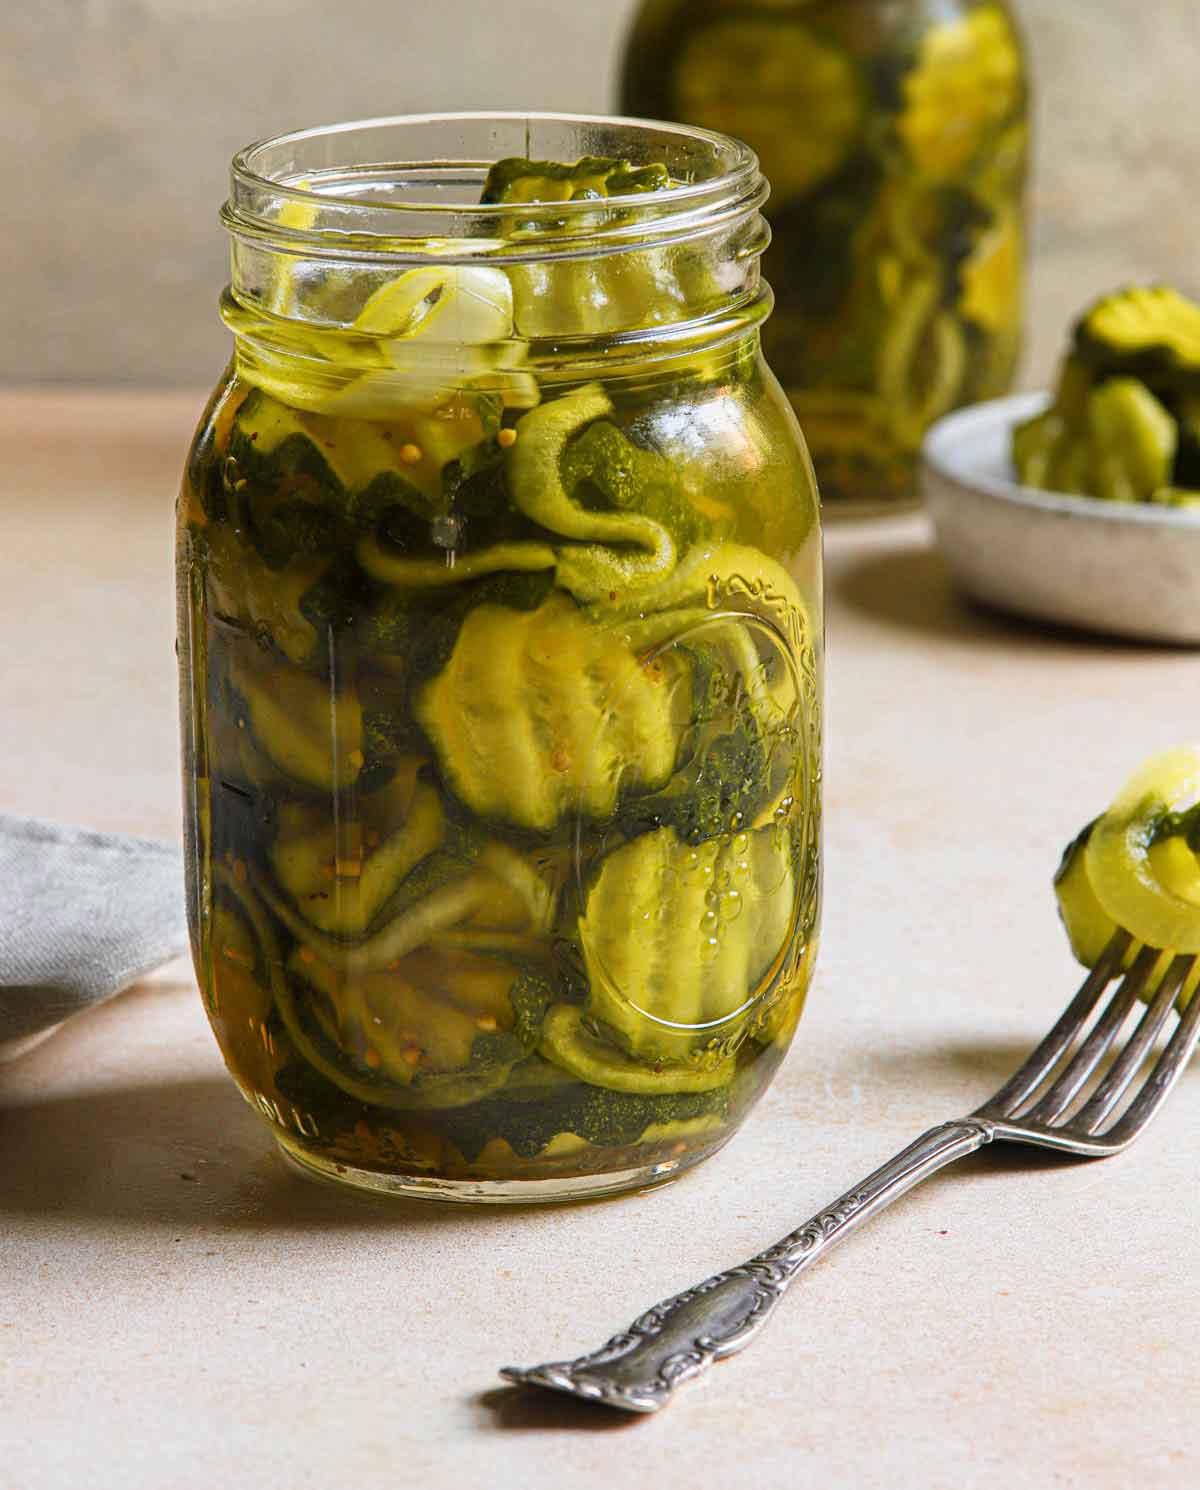 Jar of bread and butter pickles next to fork with a pickle on it.